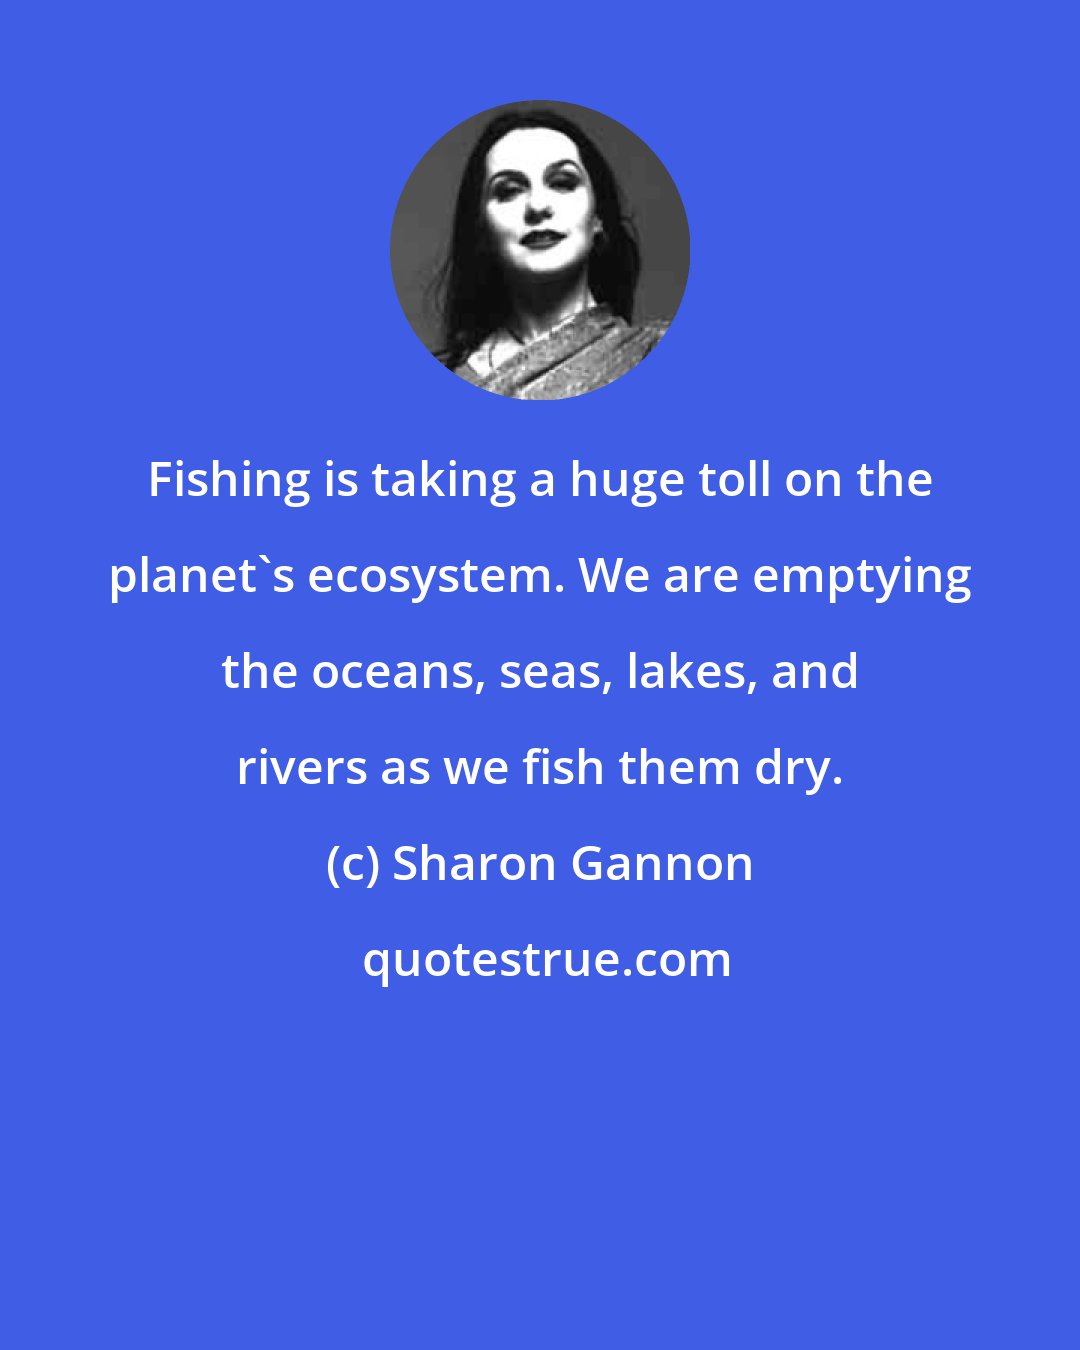 Sharon Gannon: Fishing is taking a huge toll on the planet's ecosystem. We are emptying the oceans, seas, lakes, and rivers as we fish them dry.